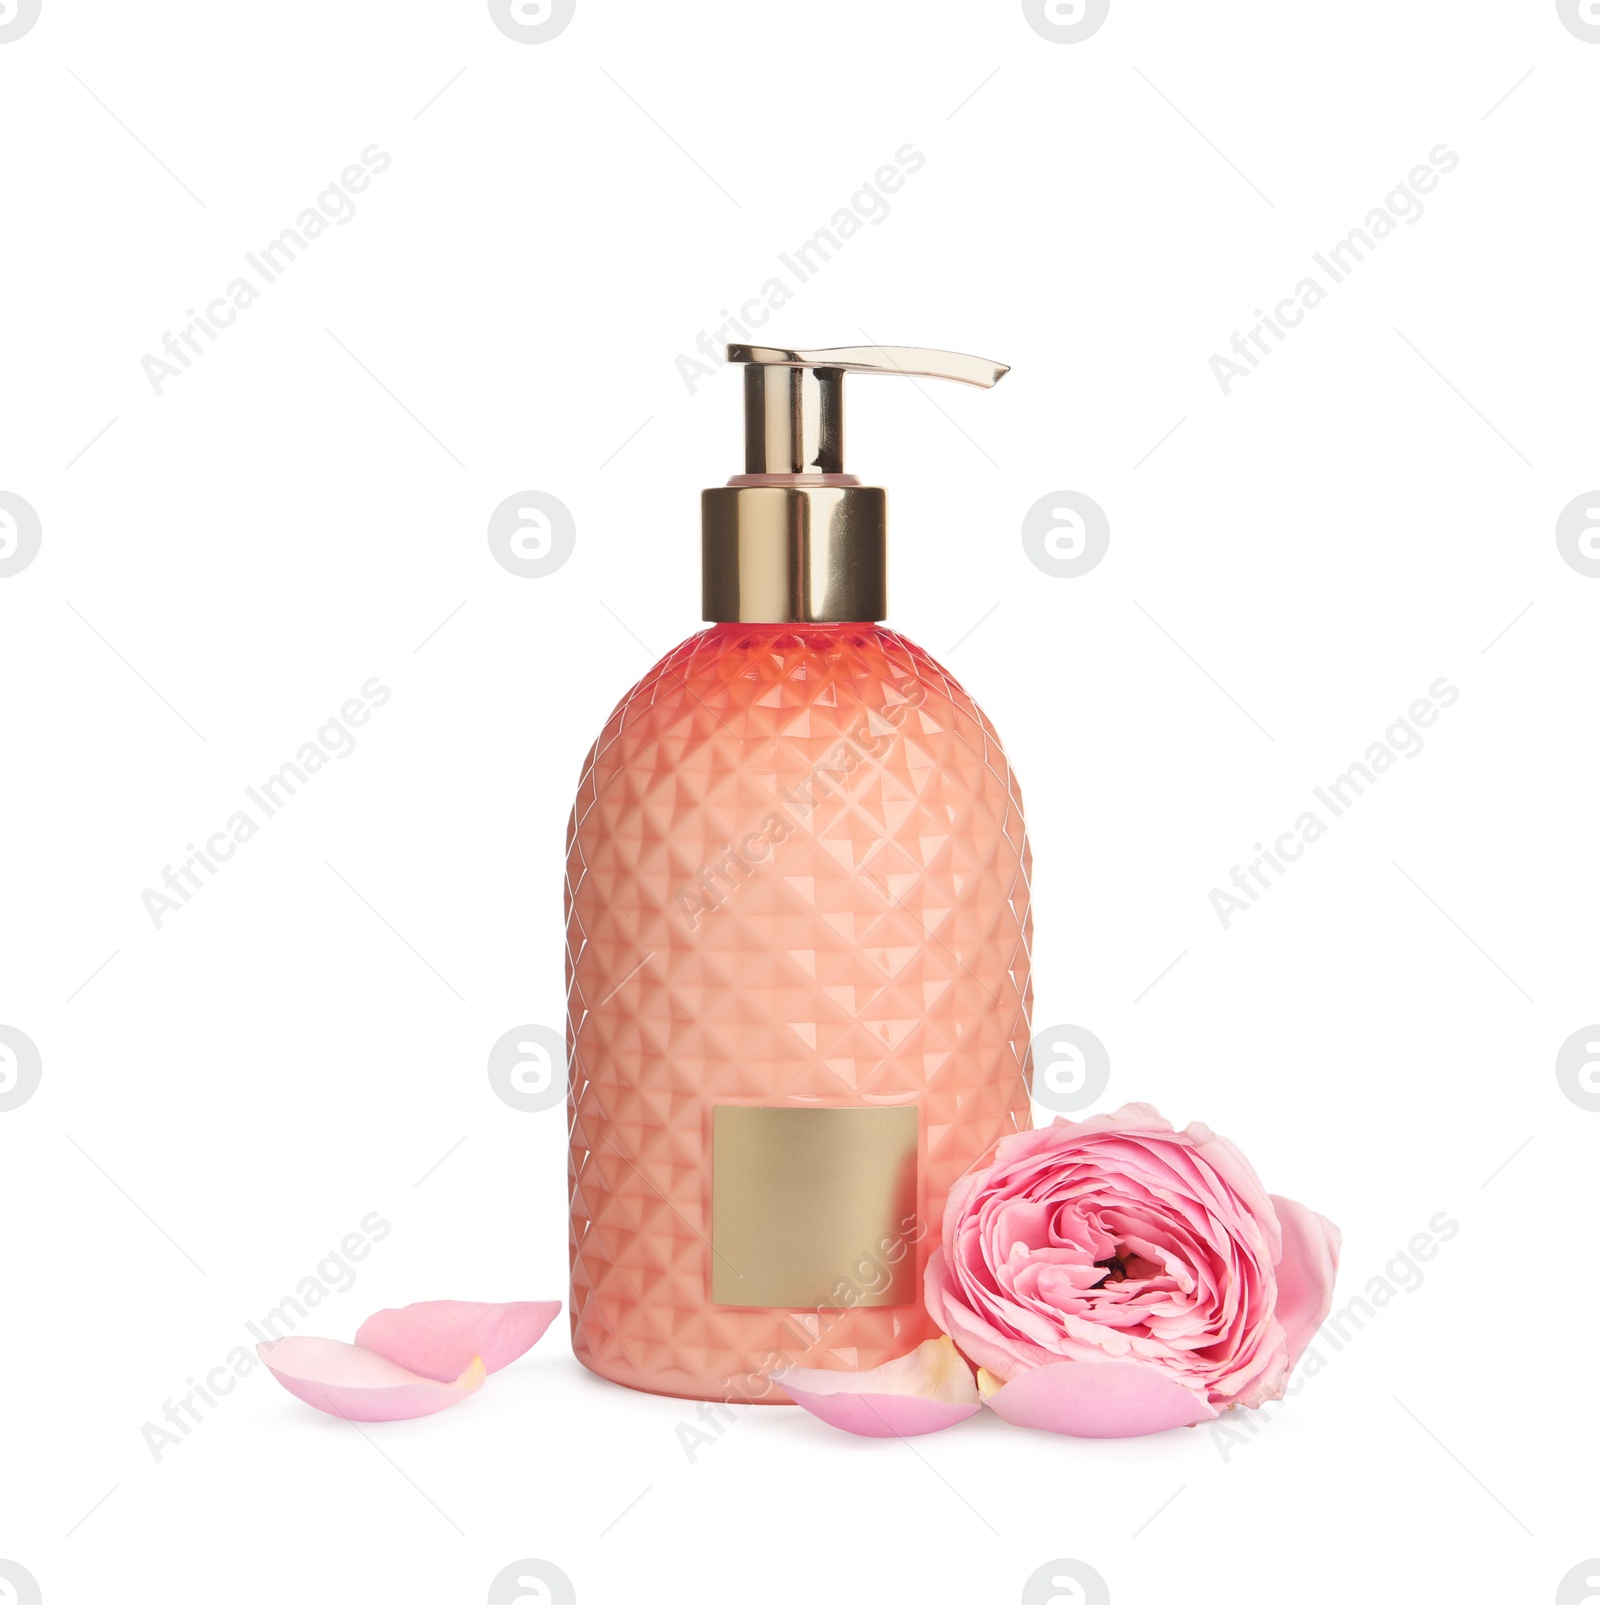 Photo of Stylish dispenser with liquid soap and flower on white background